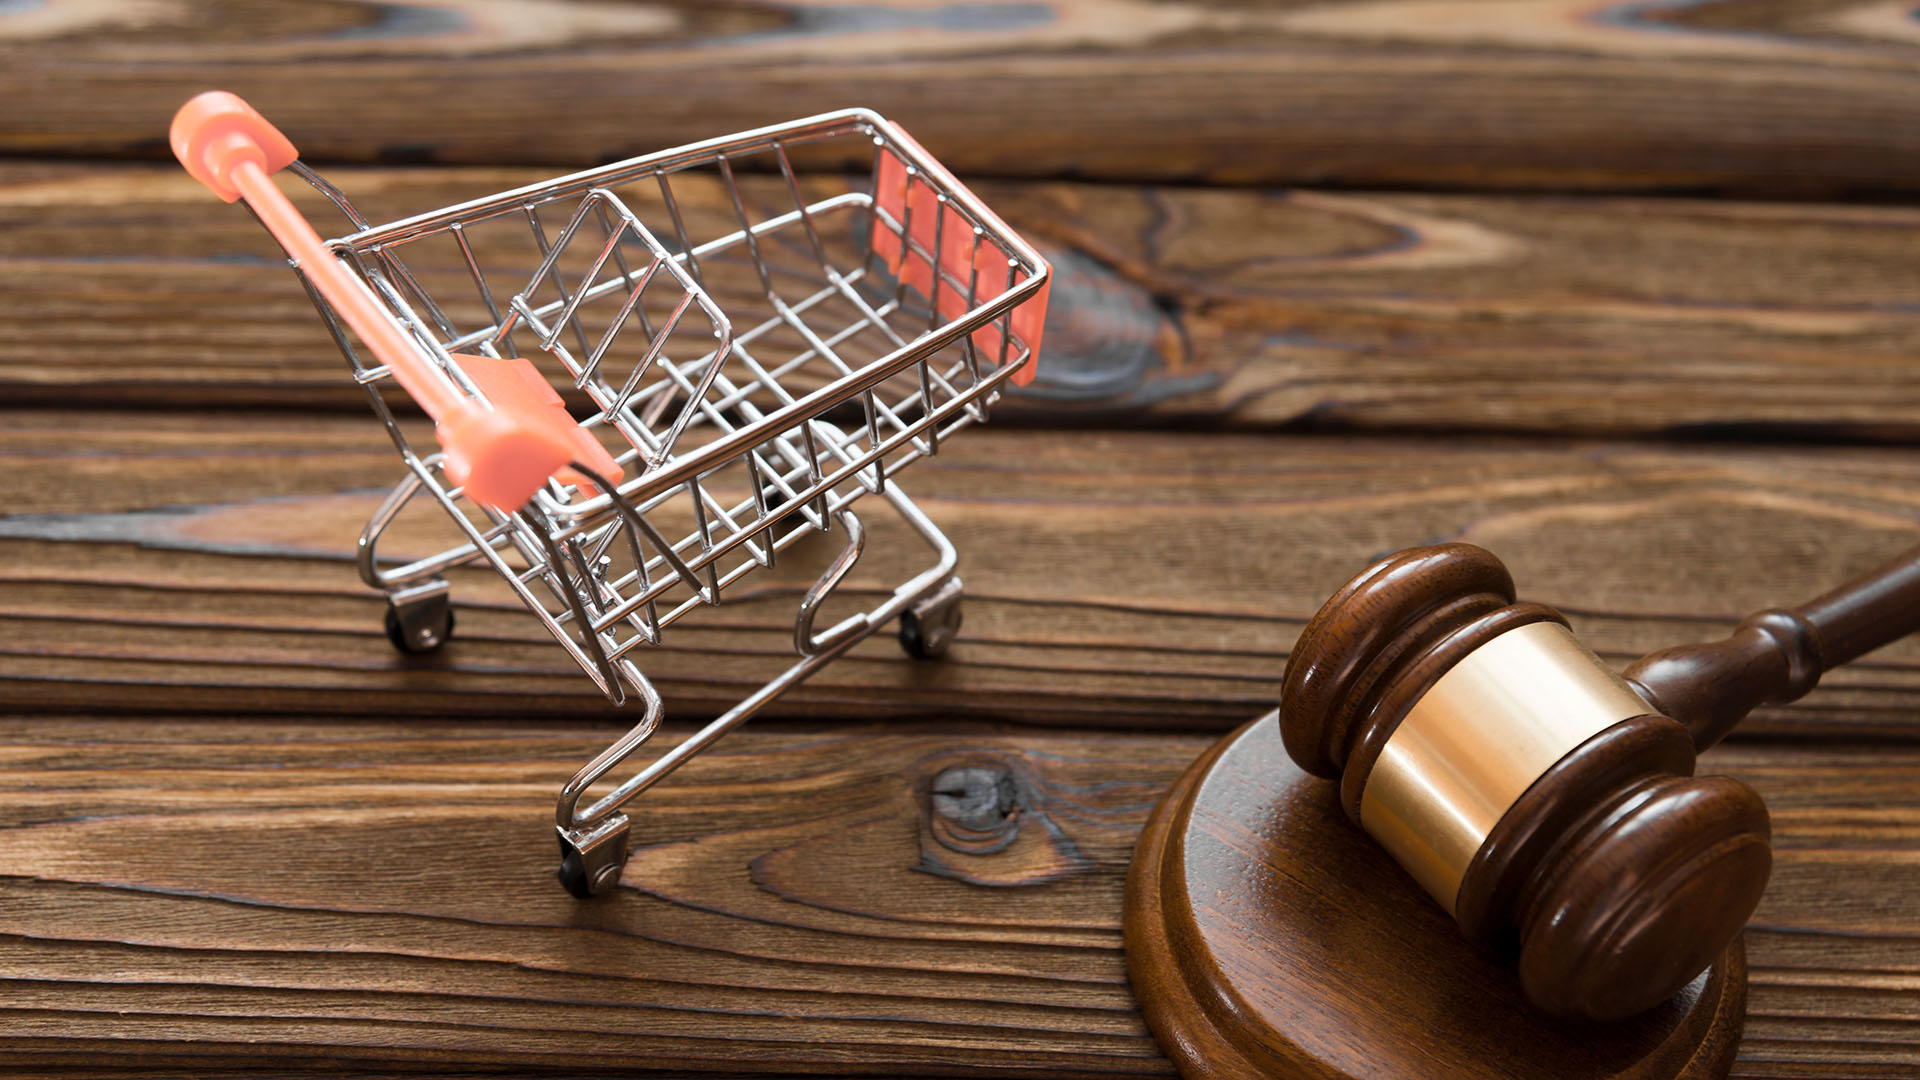 A miniature shopping cart and gavel sitting on top of wooden planks